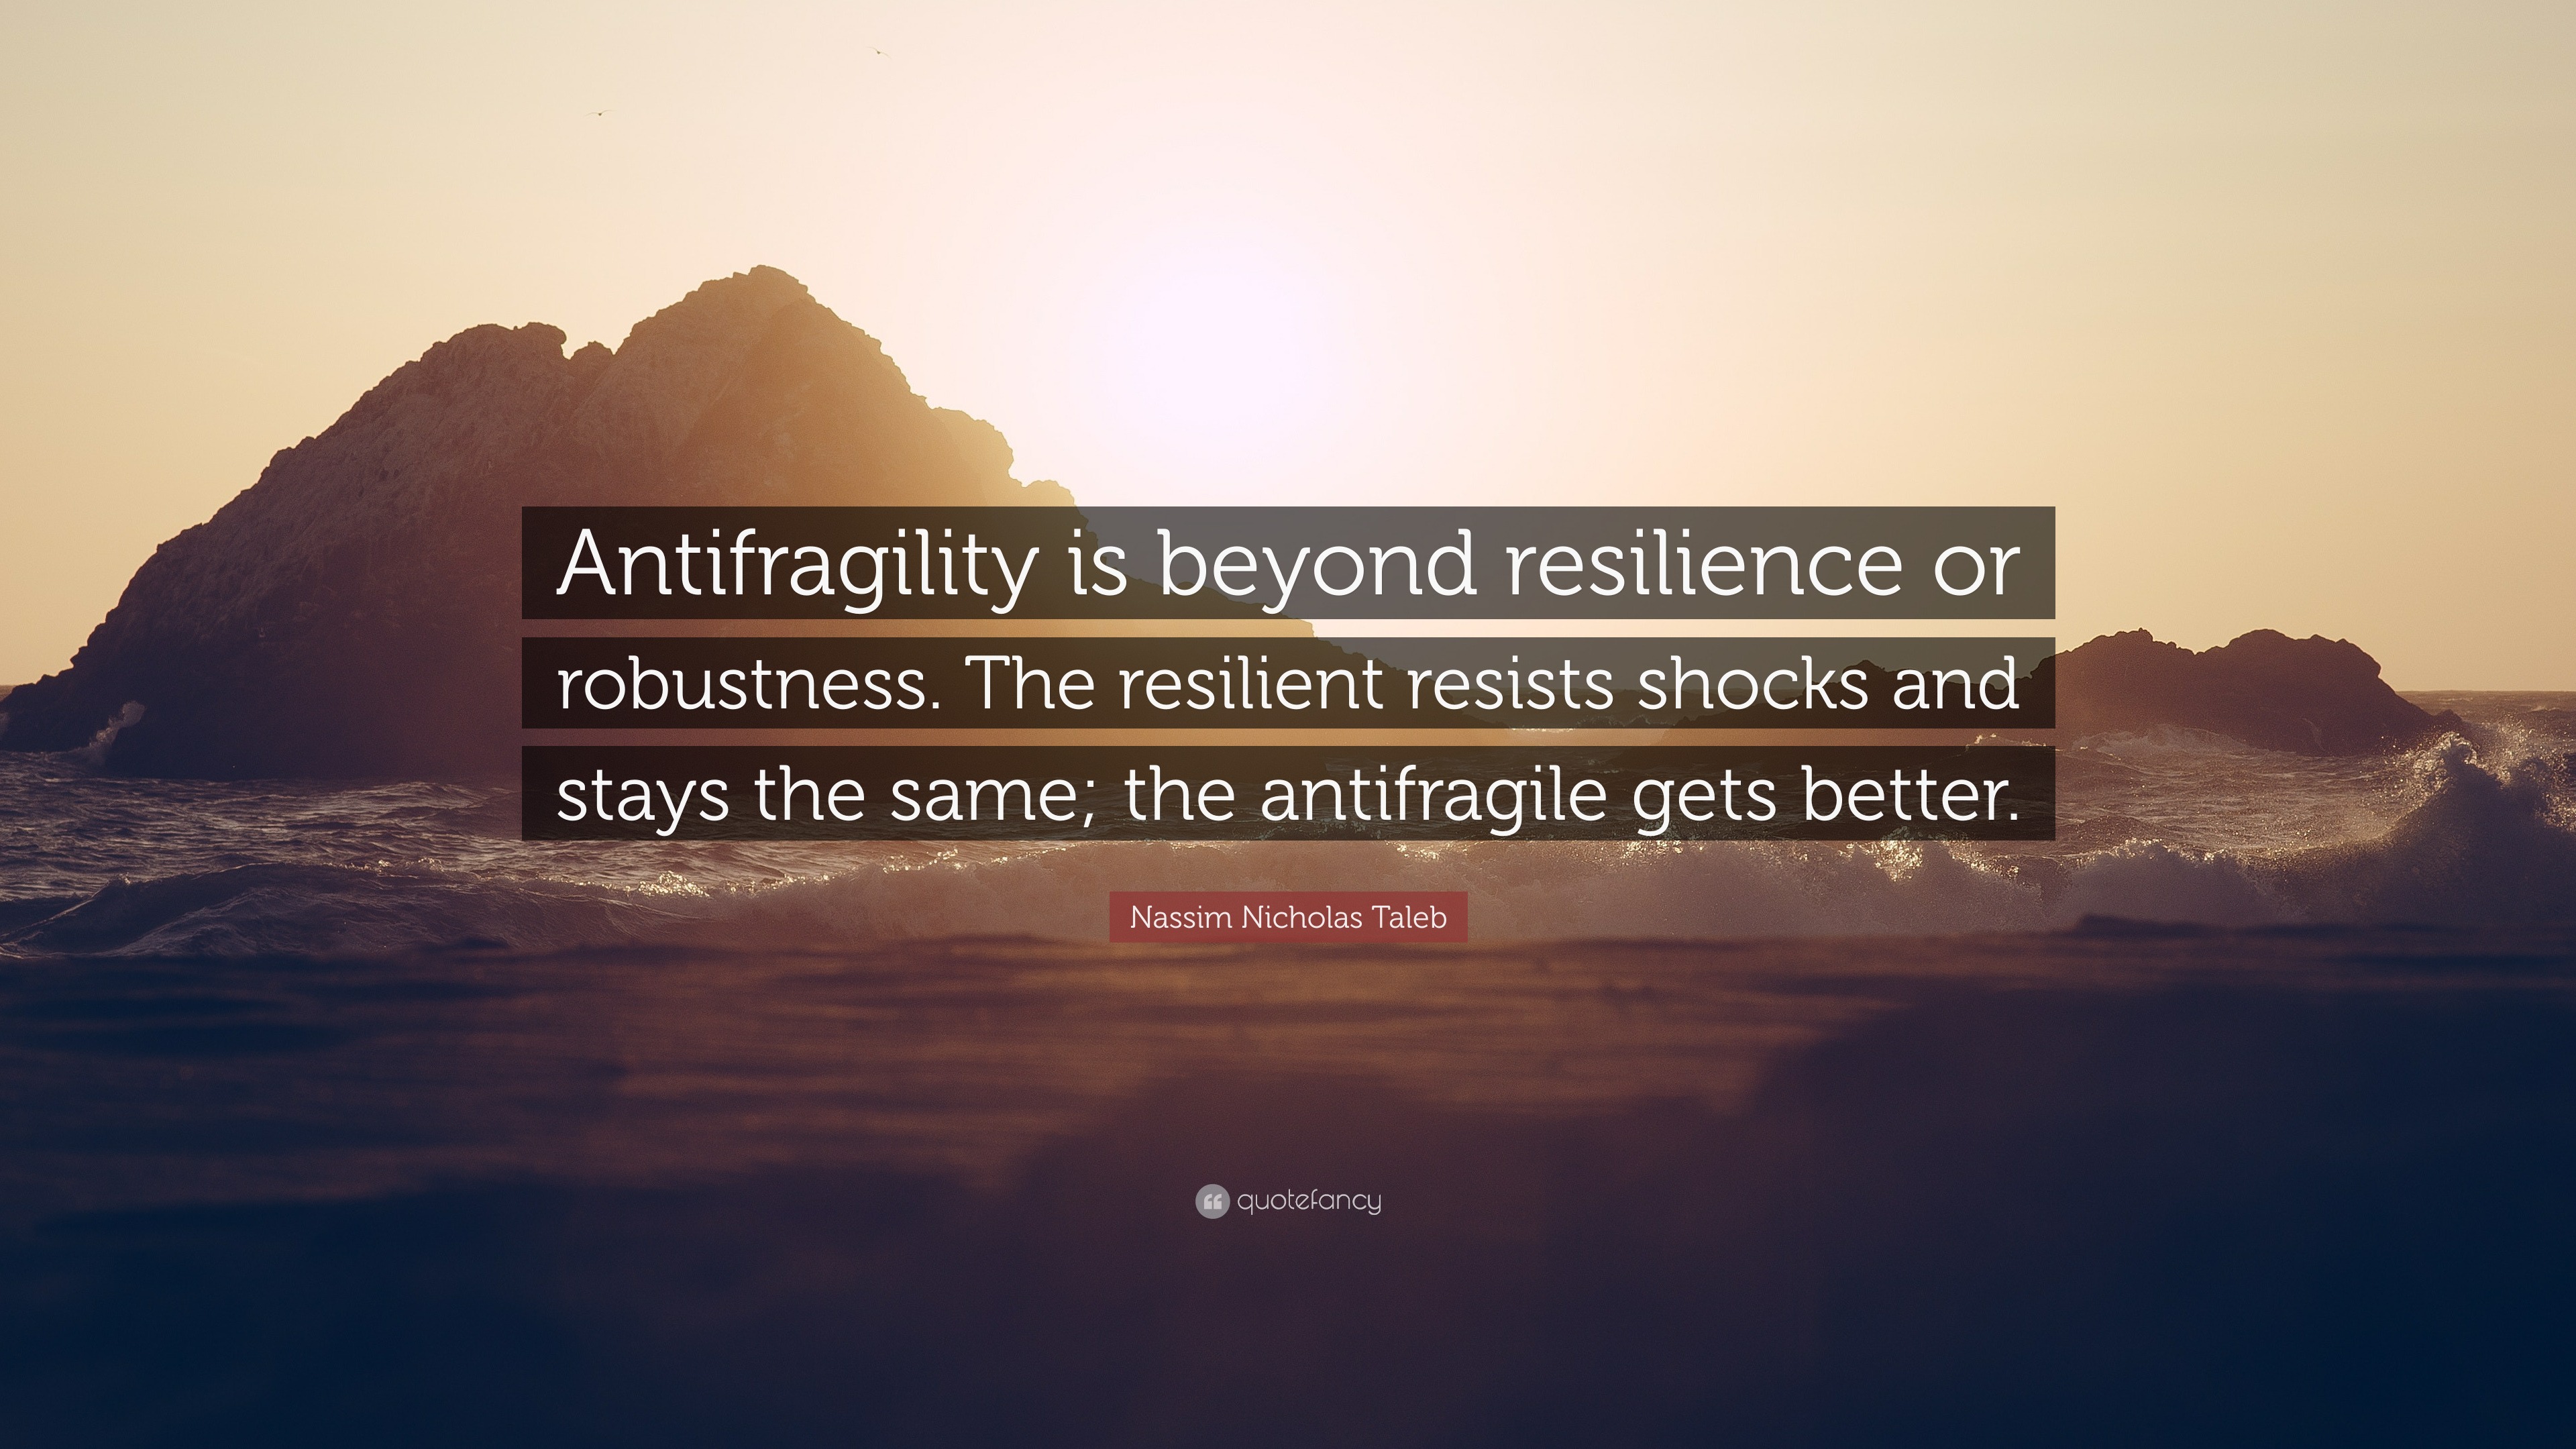 Nassim Nicholas Taleb Quote: “Antifragility is beyond resilience or ...